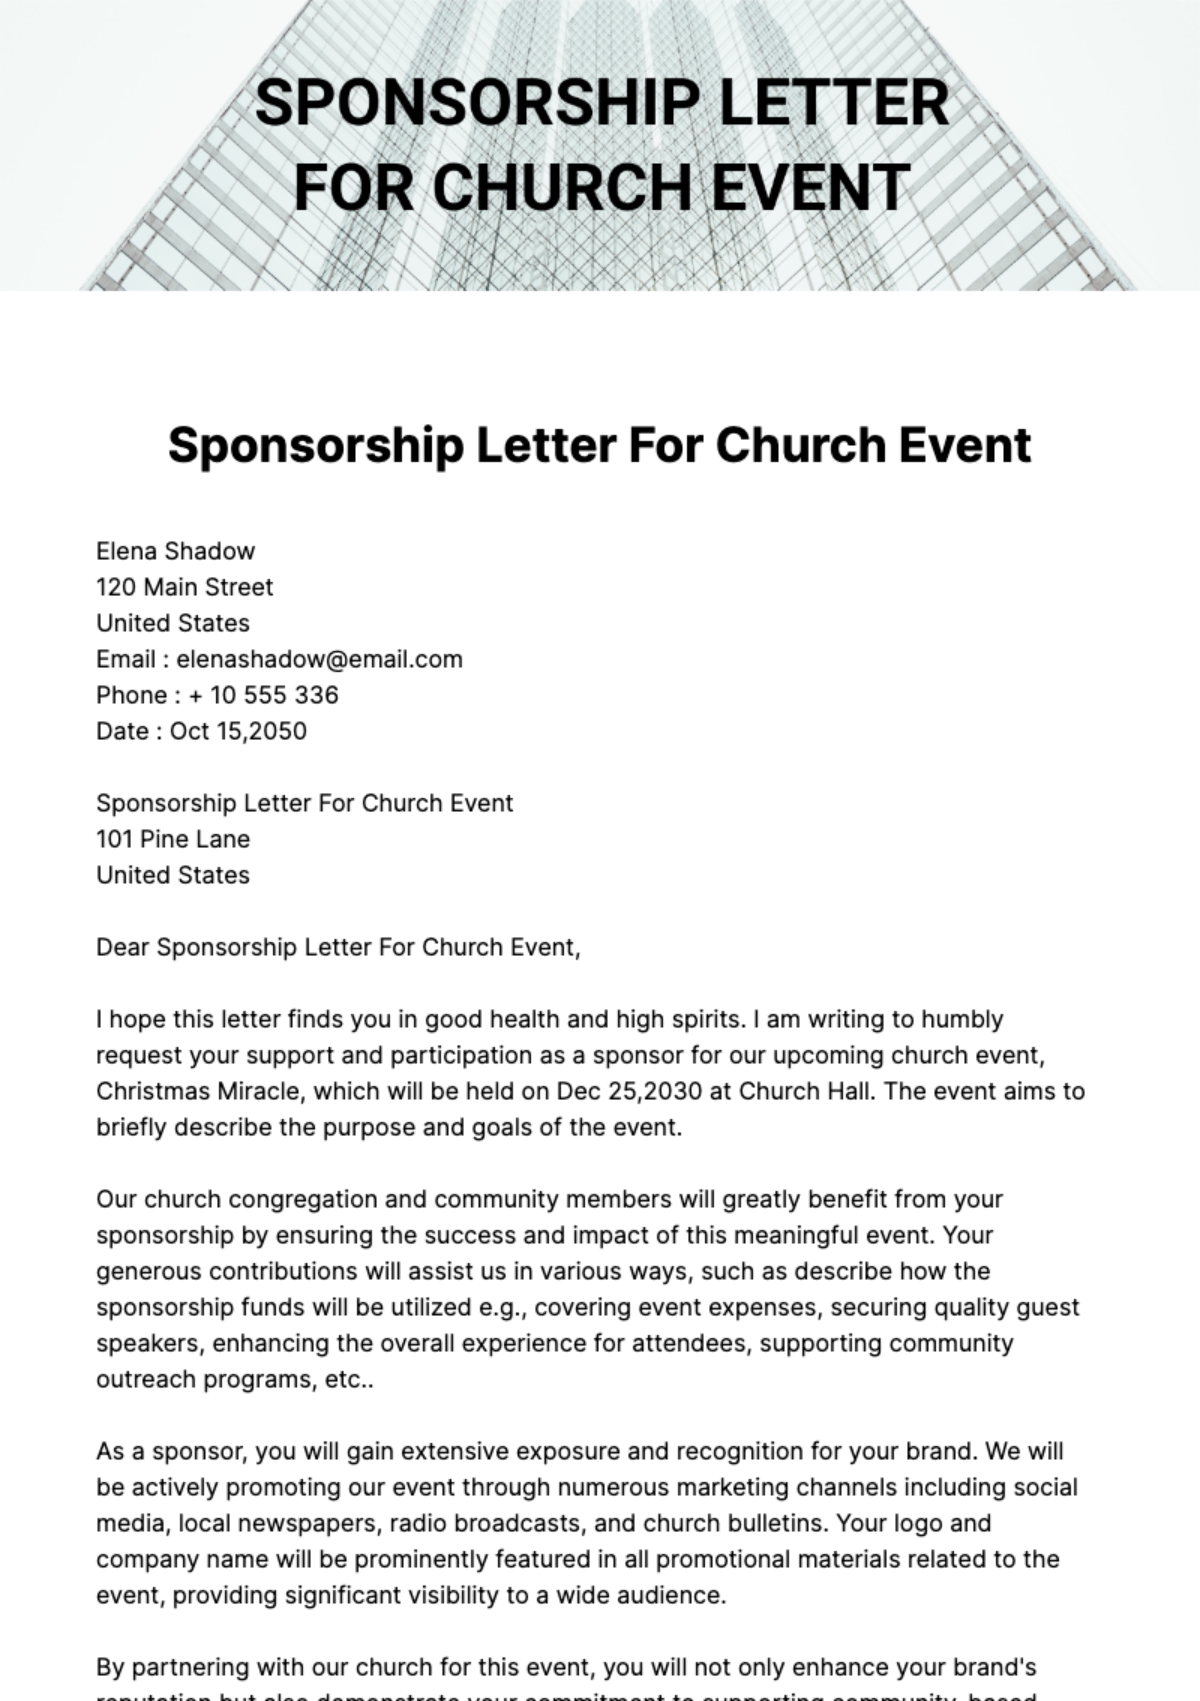 Free Sponsorship Letter For Church Event Template